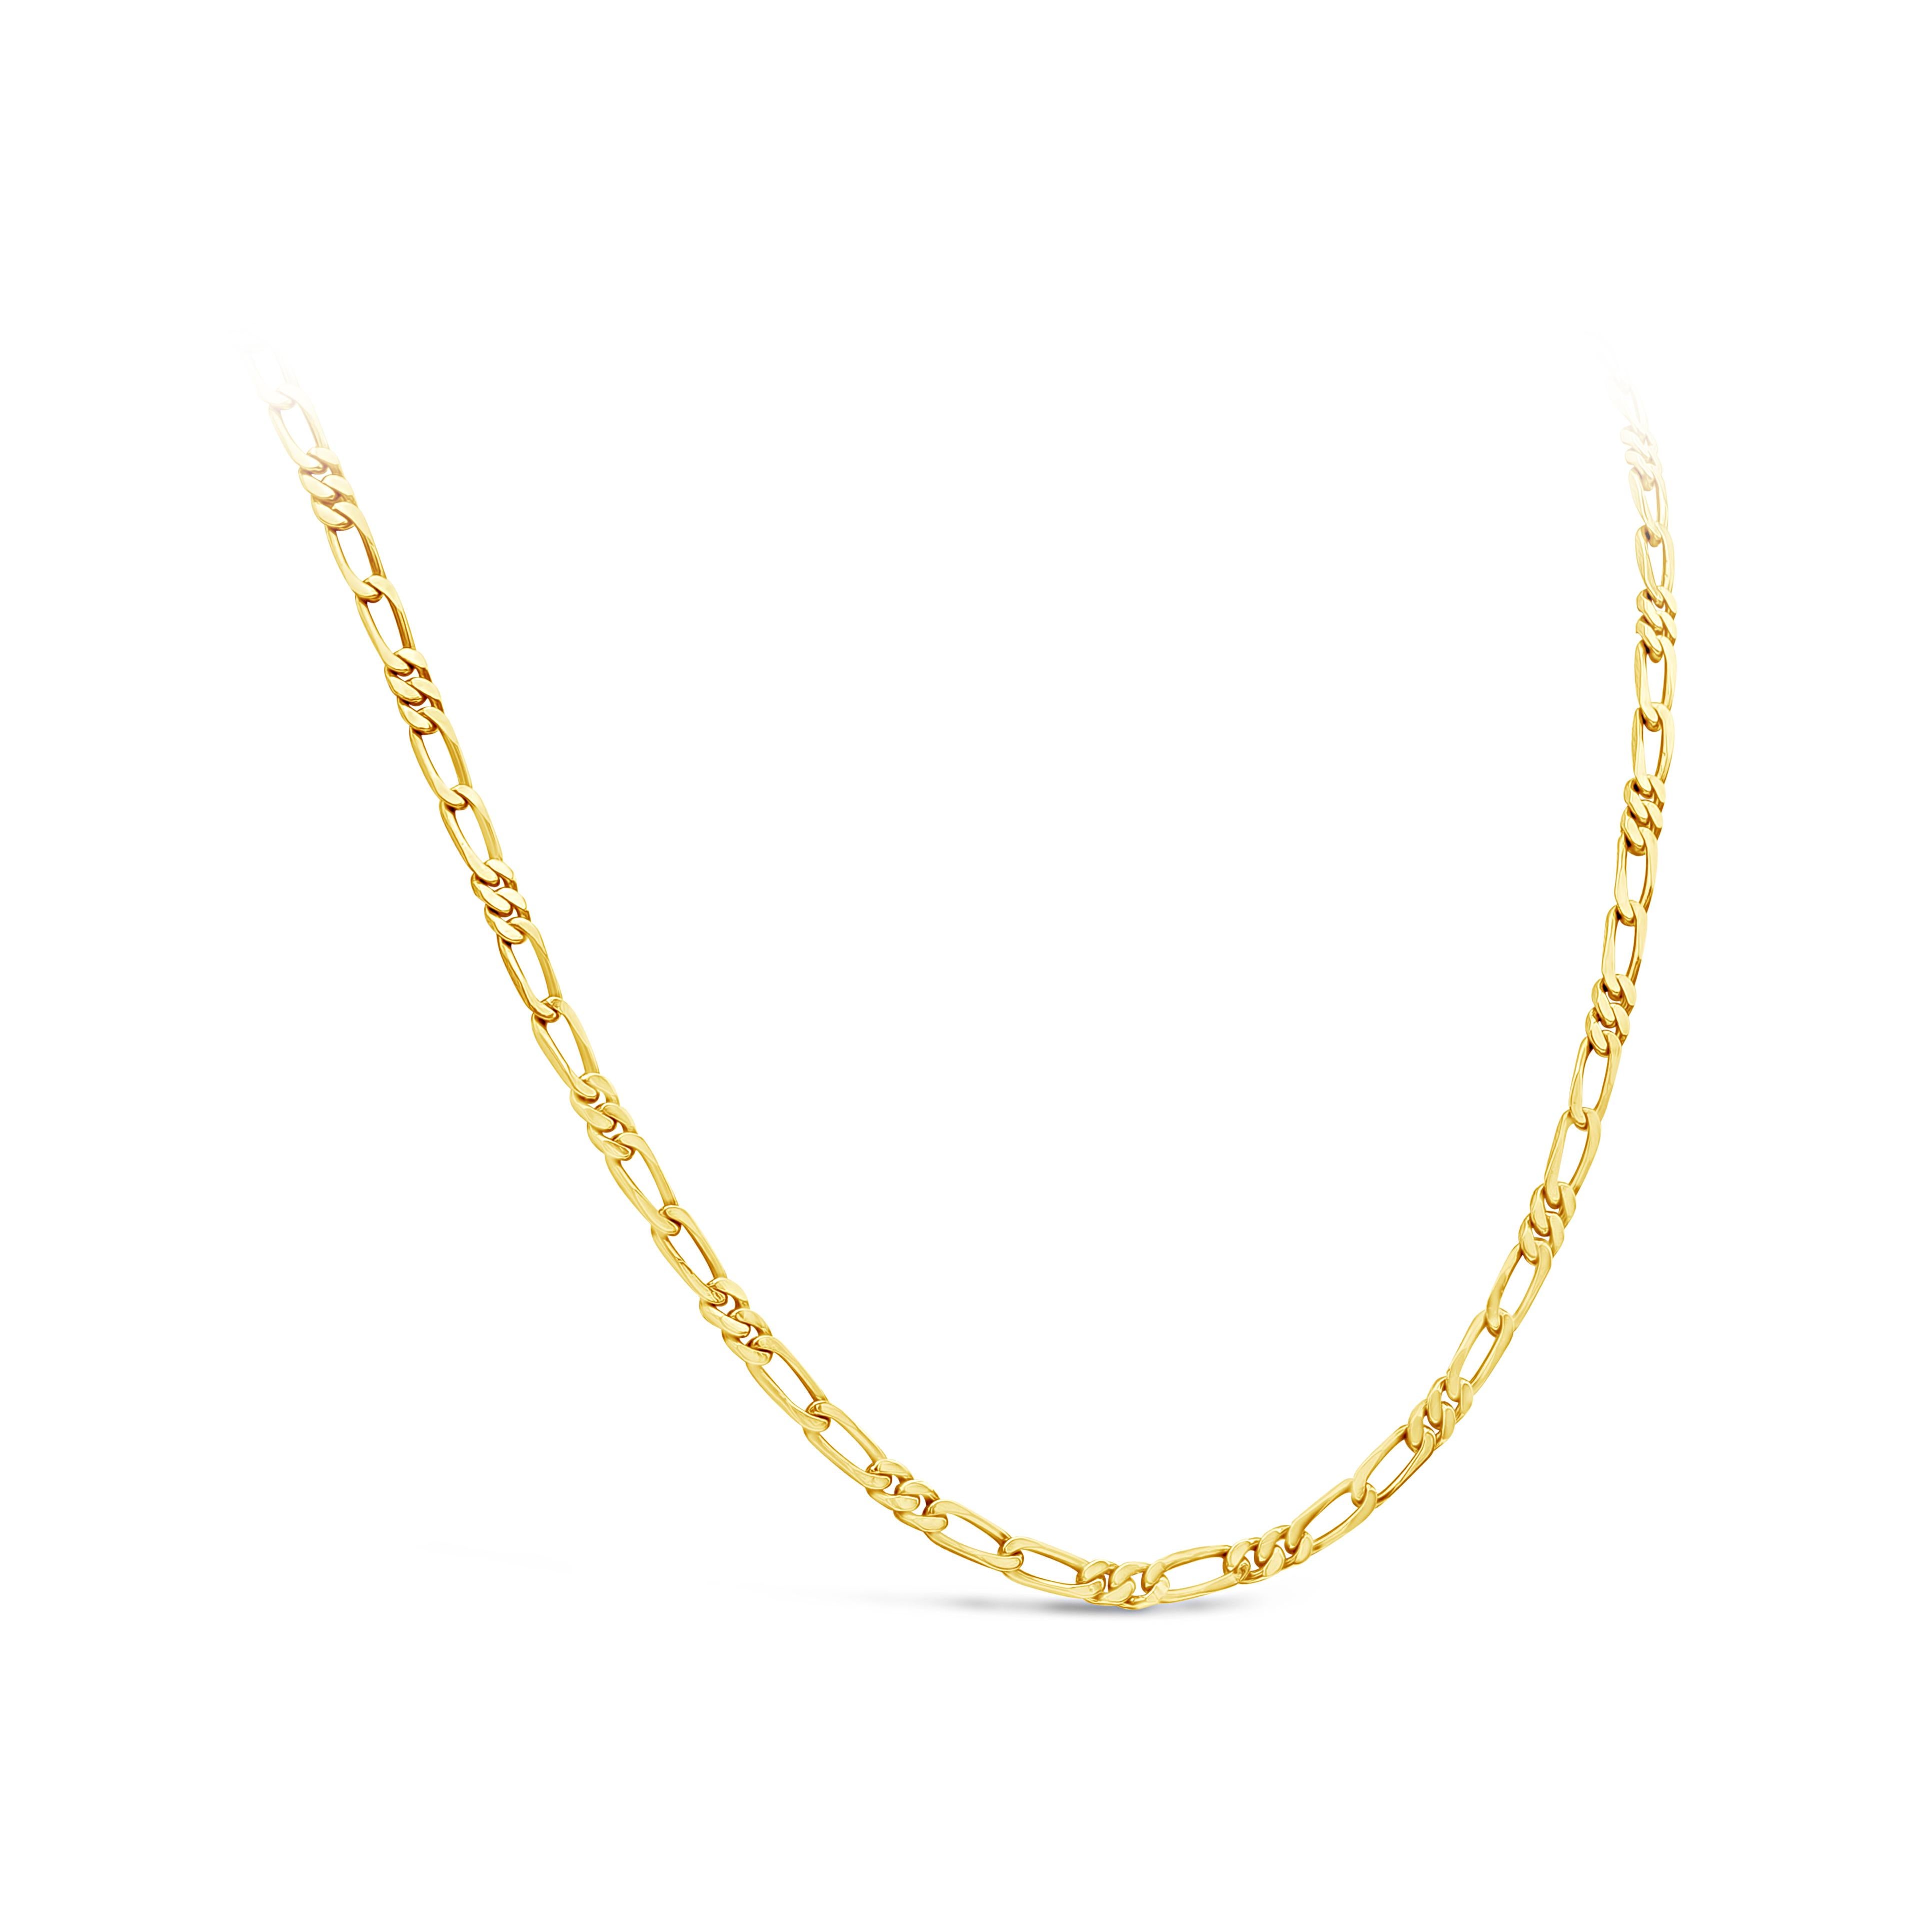 A vintage 18 karats yellow gold figaro chain necklace that has a length of 20 inches and weighs 27 grams. This chain features an alternating design of two long oval curb links and two short curb links to create the figaro design and is finished with